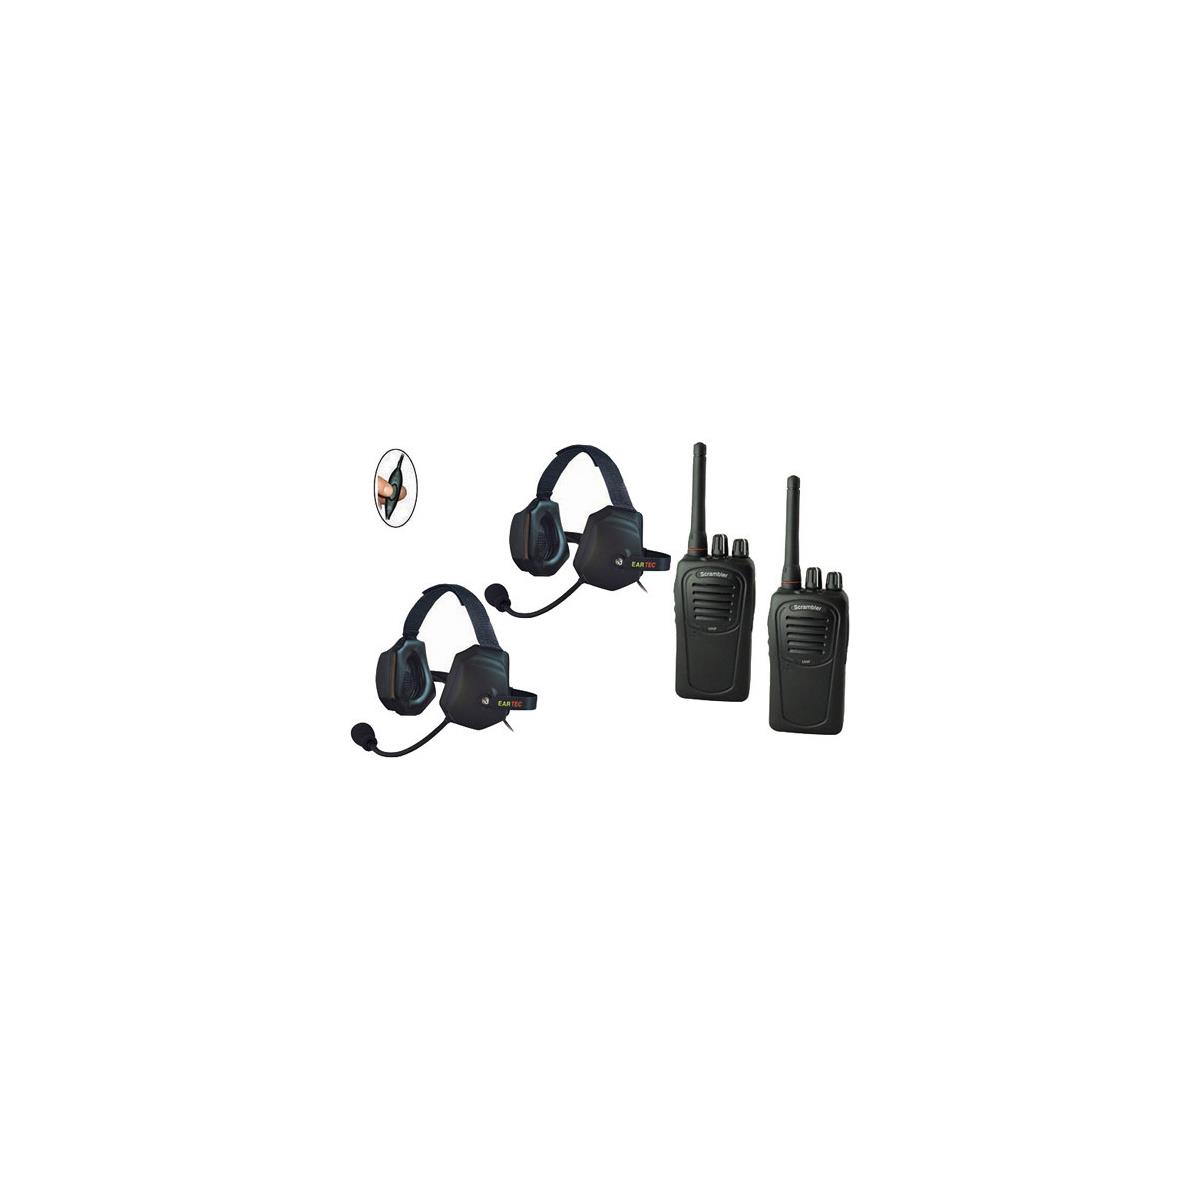 Image of Eartec SC-1000 2-User 2Way Radio System with 2x Ultra Xtreme Inline PTT Headsets